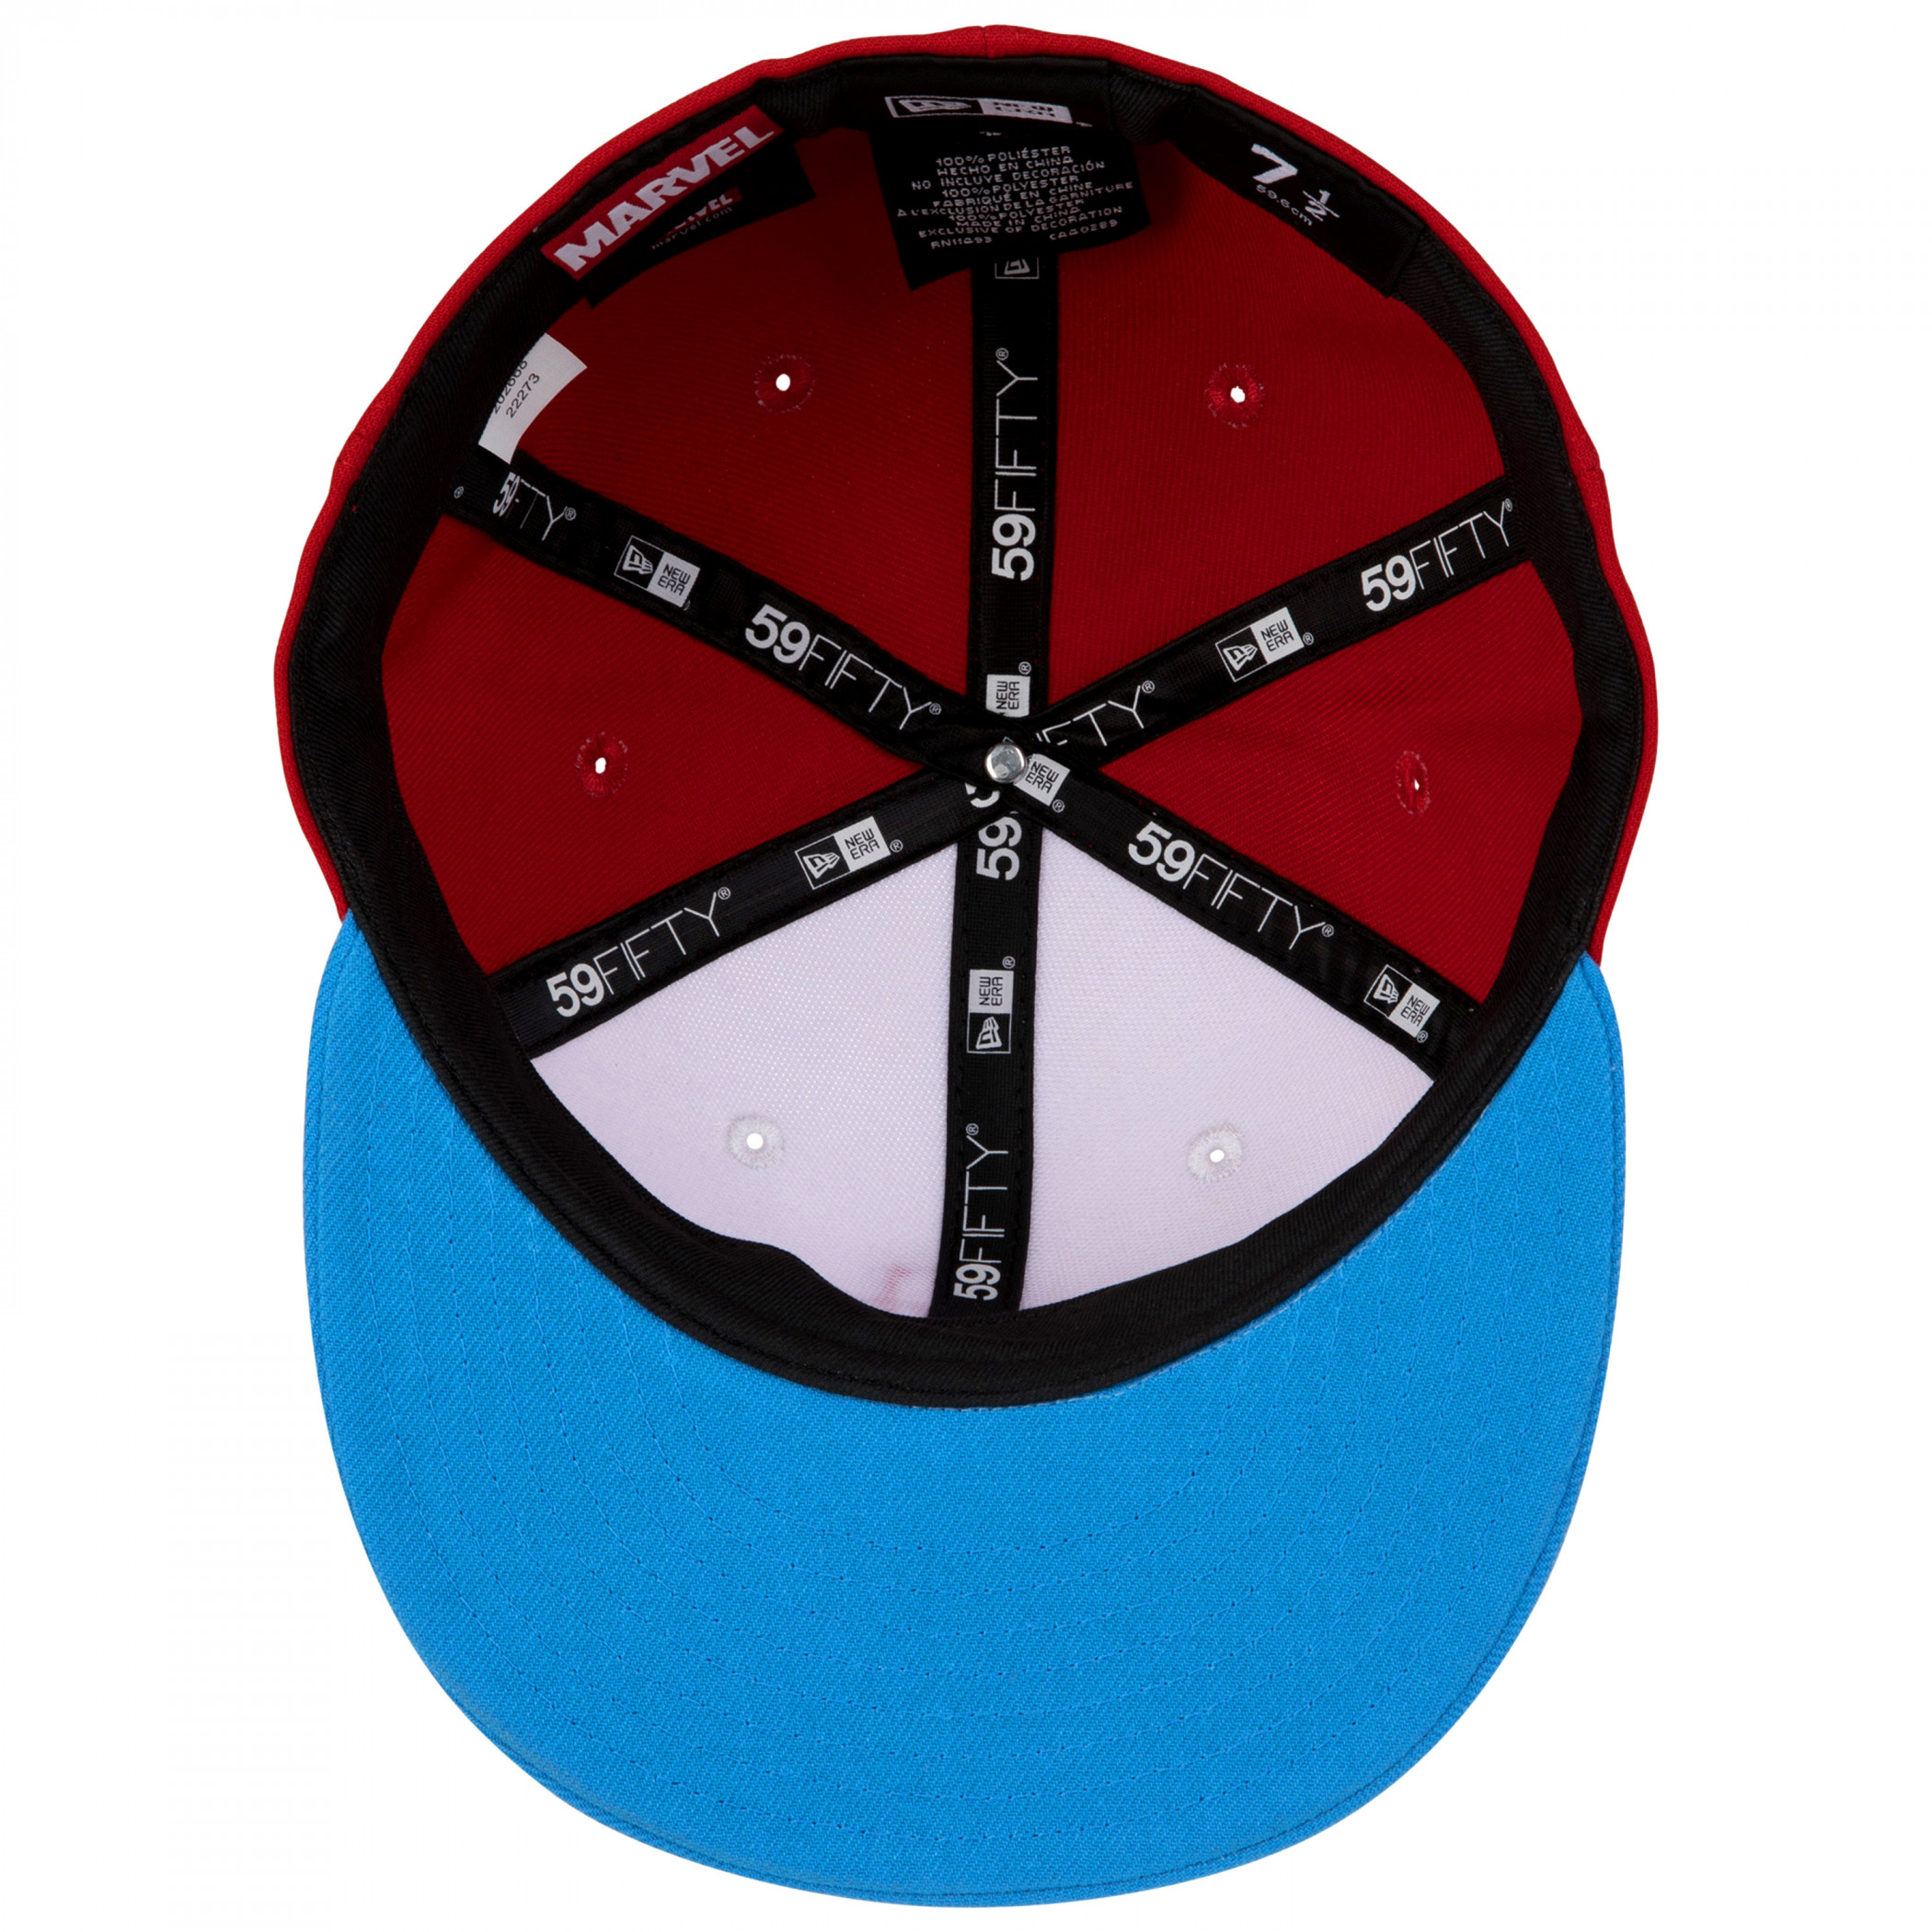 The Avengers Red White and Blue Colorway New Era 59Fifty Fitted Hat